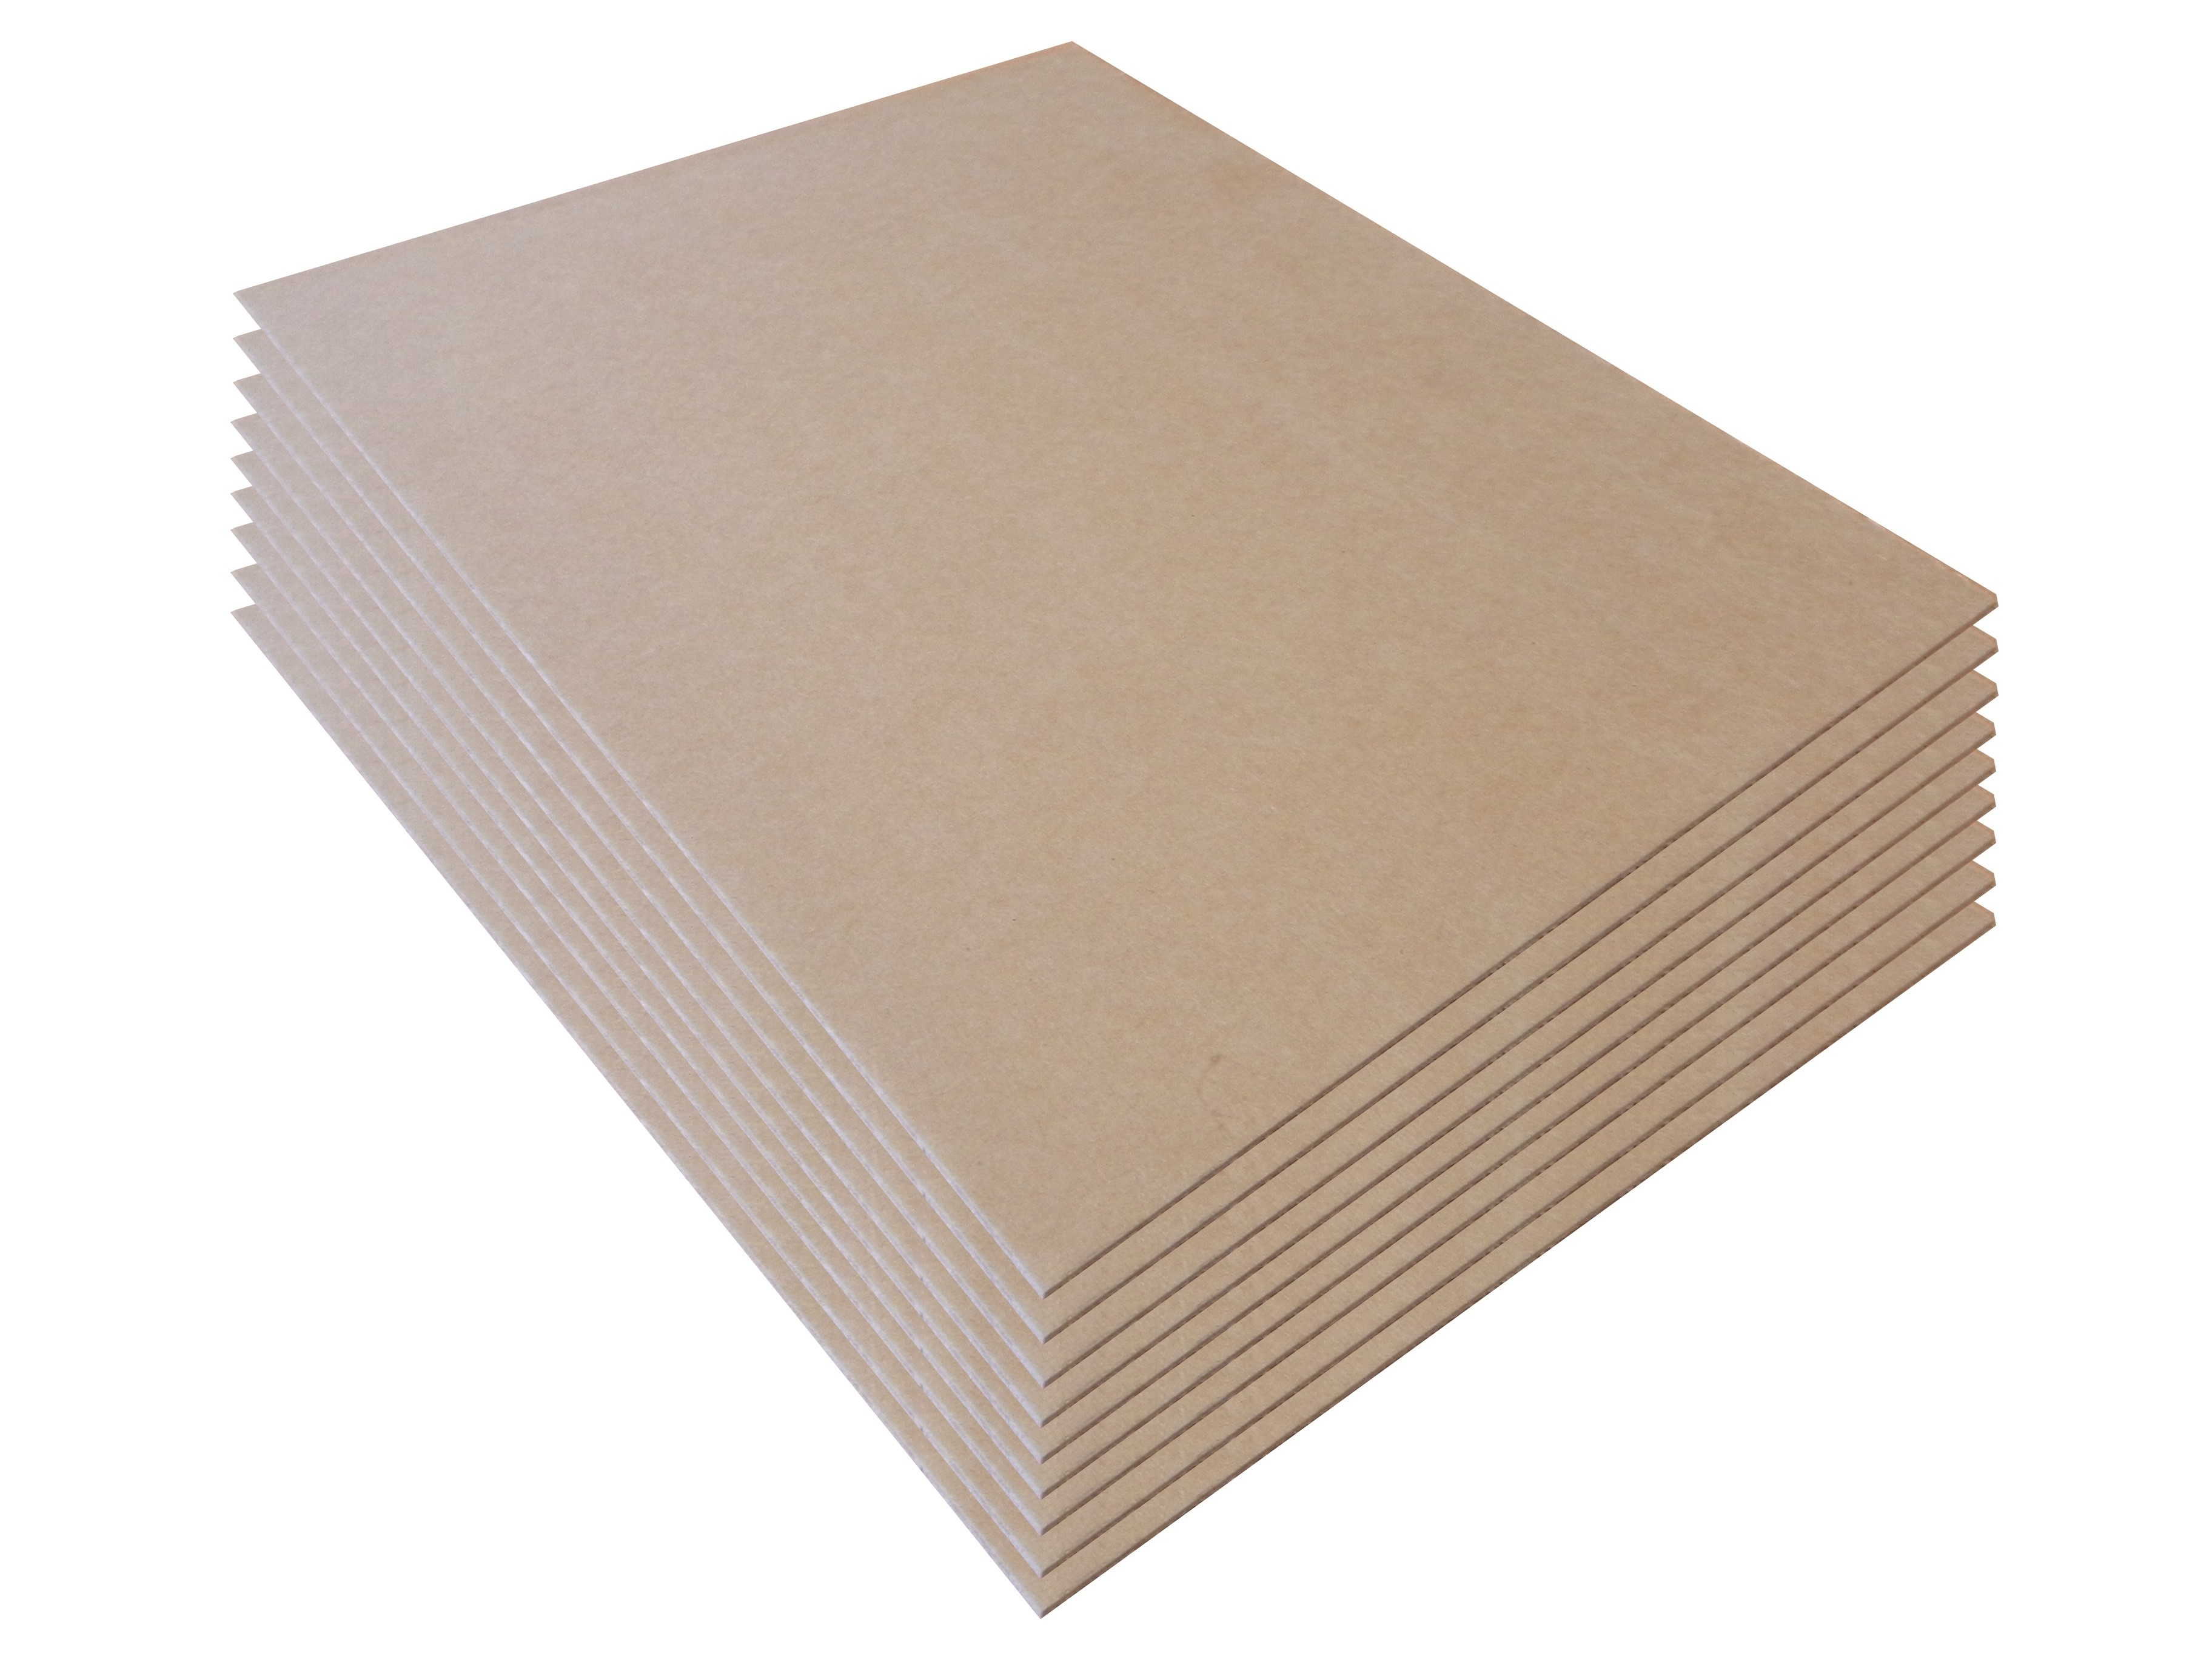 Backing Board A4 - 10 pack